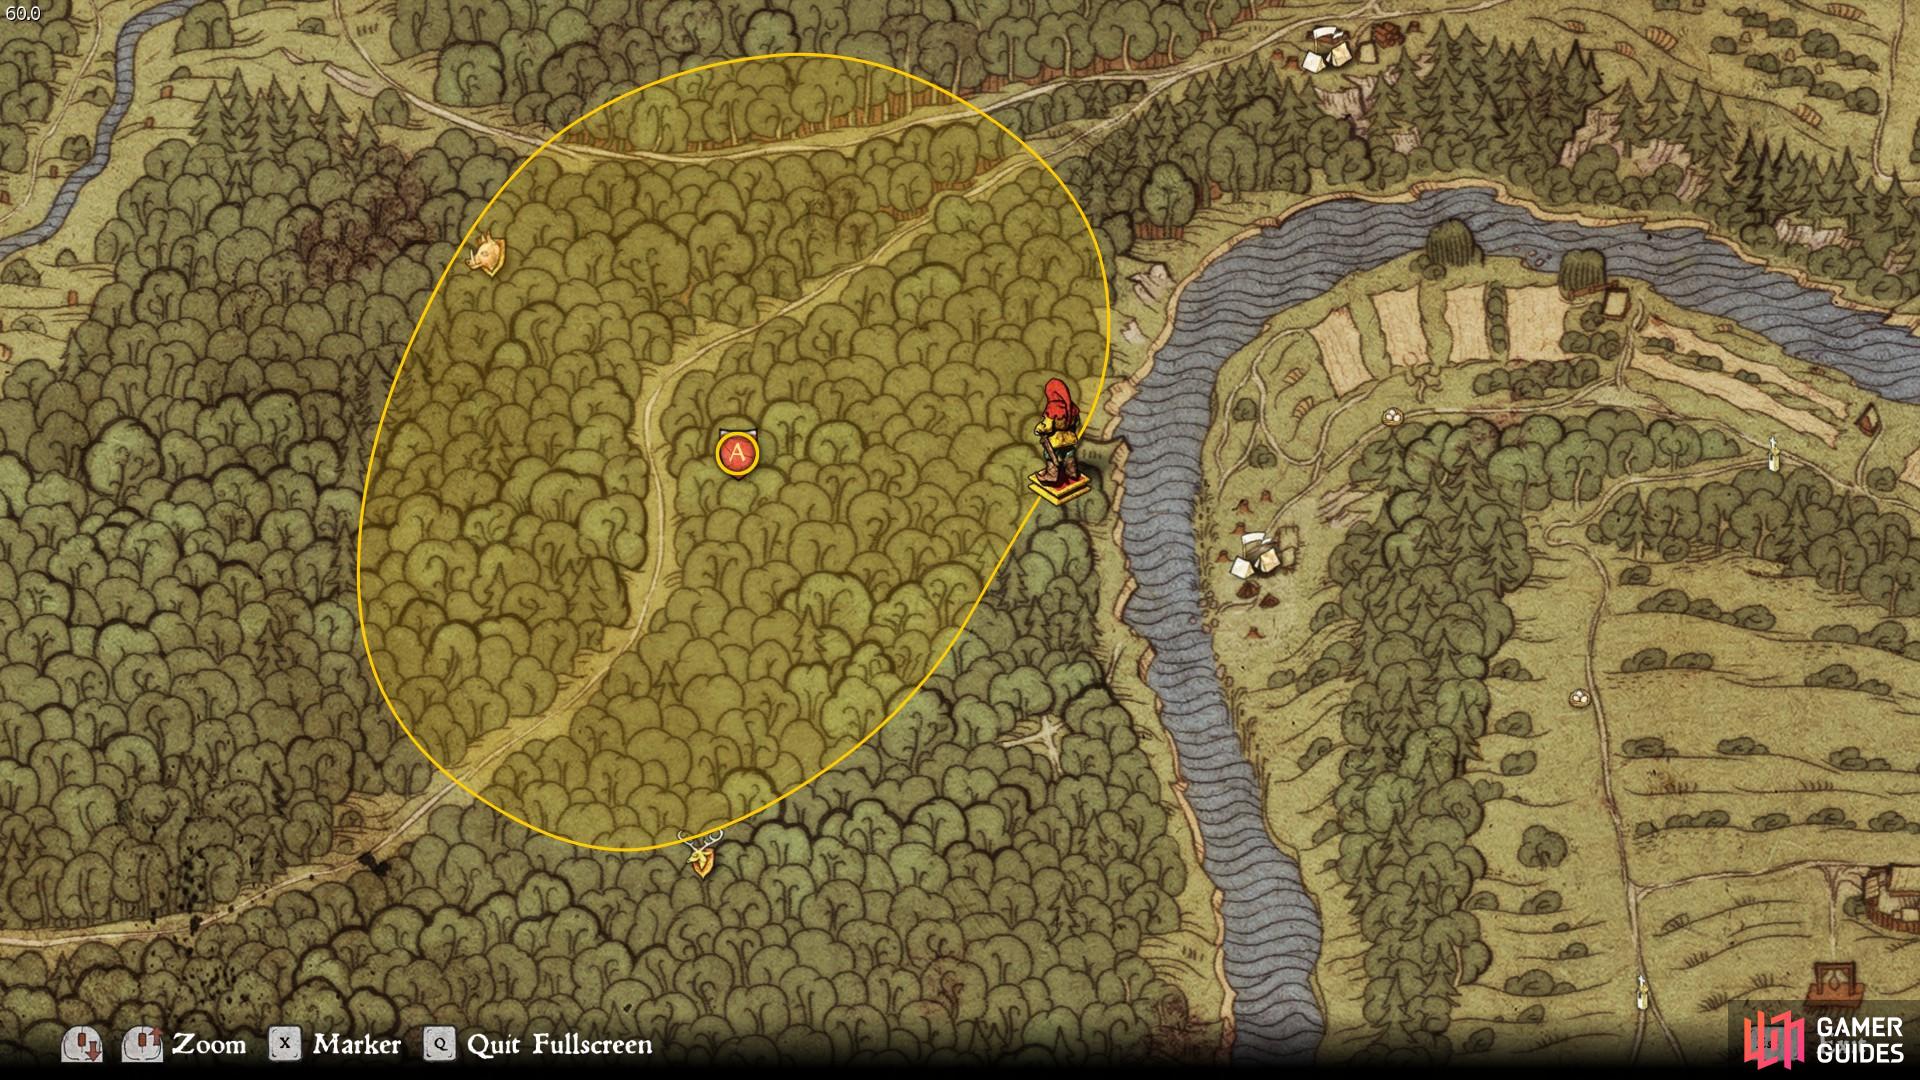 Search the region highlighted on the map for Nightingales. It is not always possible to see them, but you will note their presence by following the sound of their song. 